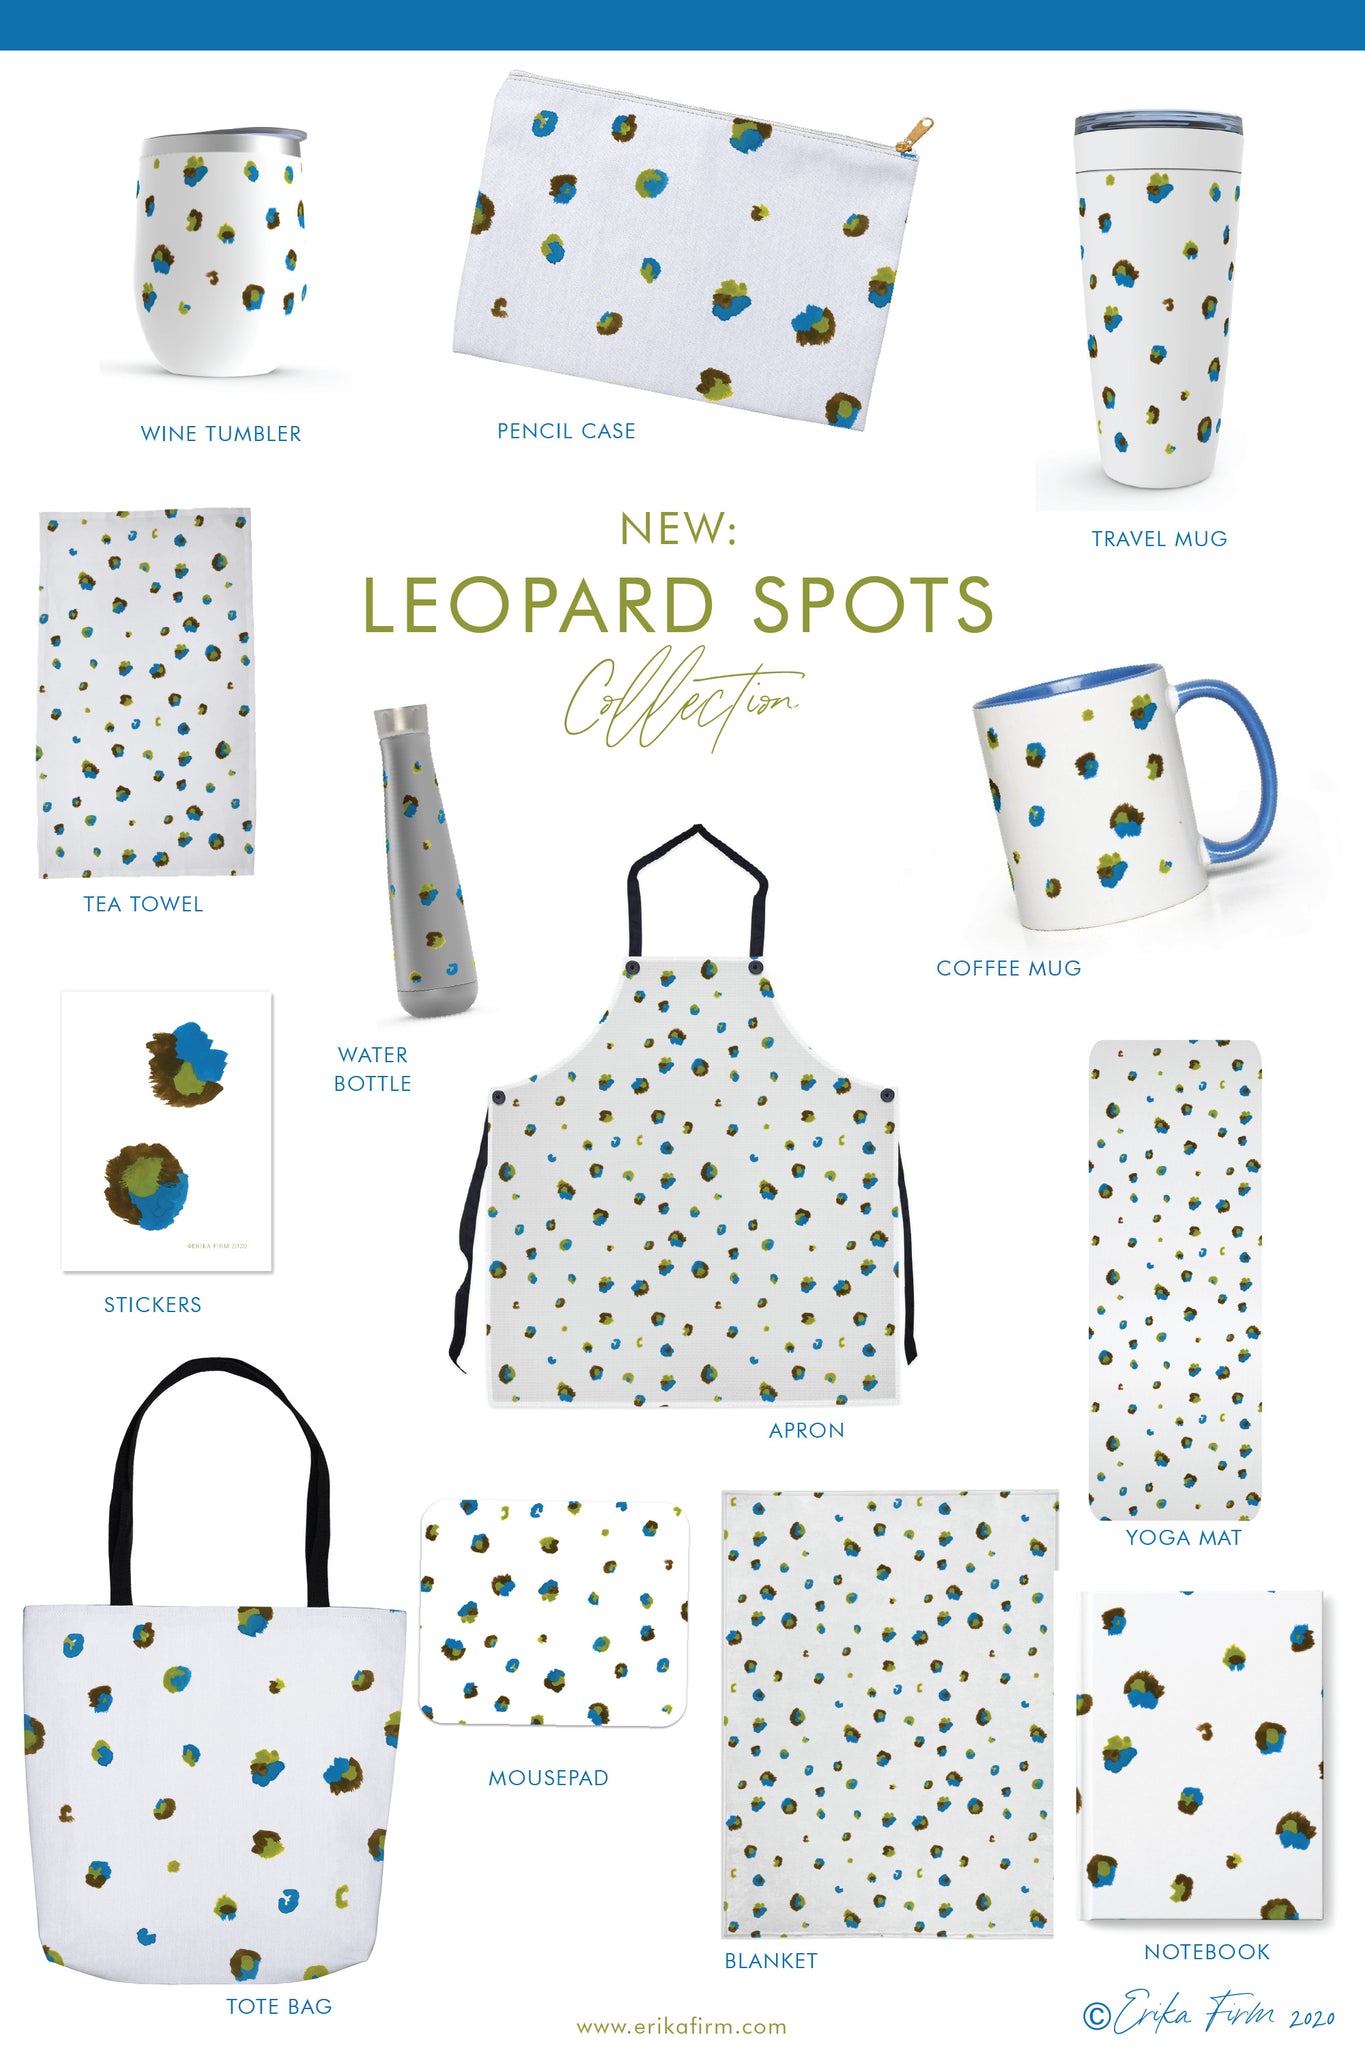 Leopard Spots Pattern Collection of drinkware, tea towels, yoga mats and gifts by Erika Firm